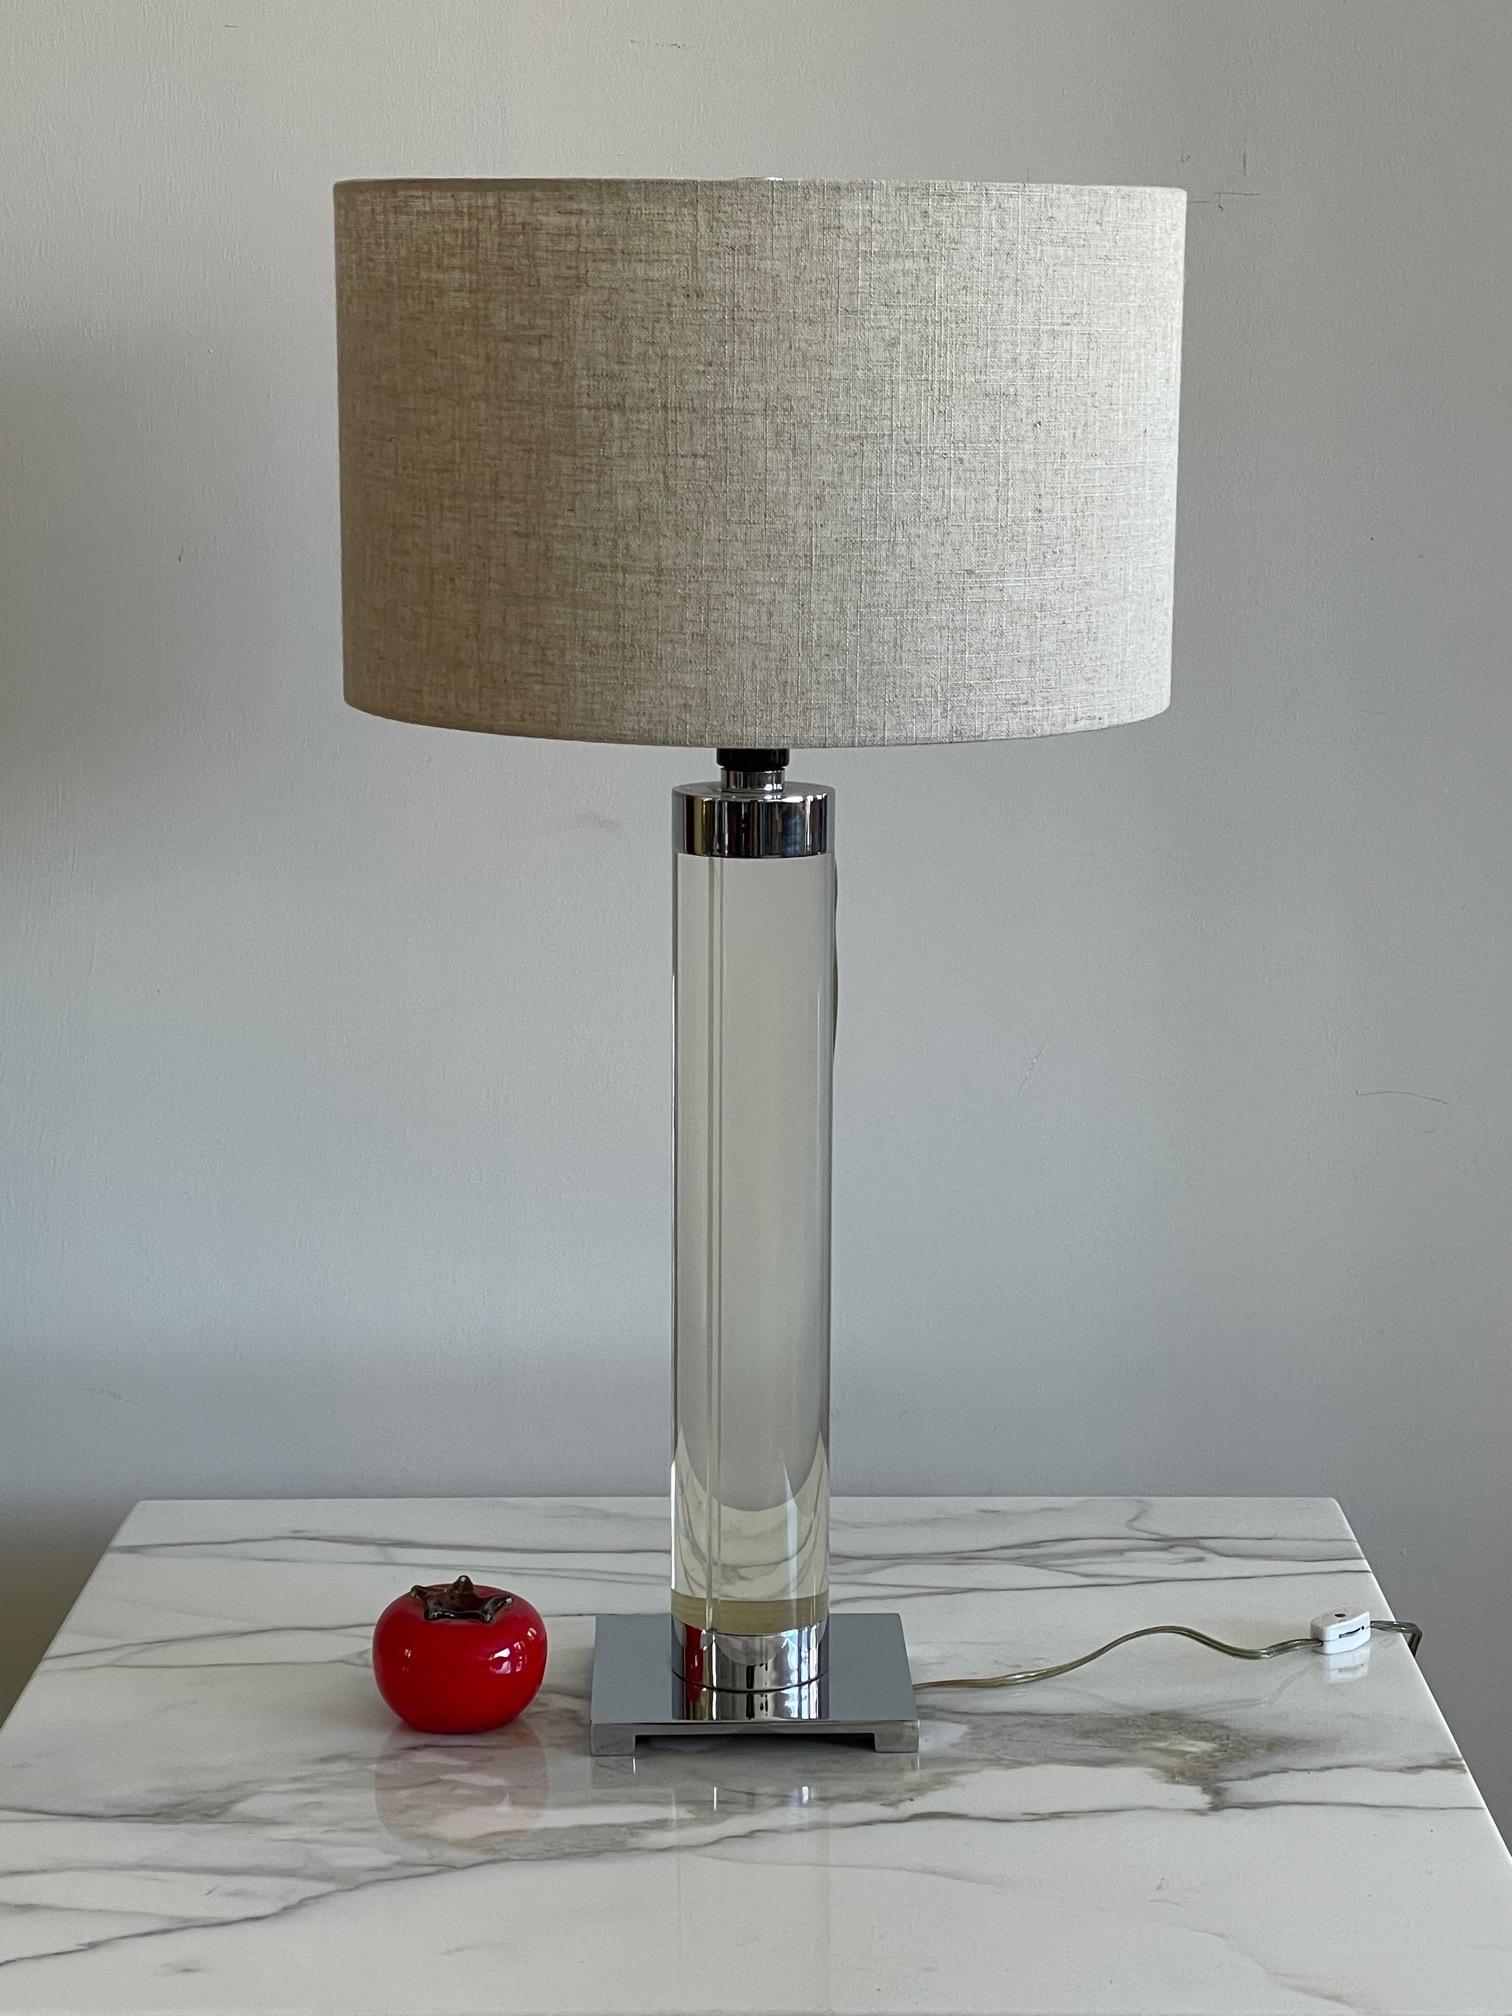 A classic table lamp by attributed to Hansen, lucite rod with chromed fittings. Three way switch and interruptor cord switch.